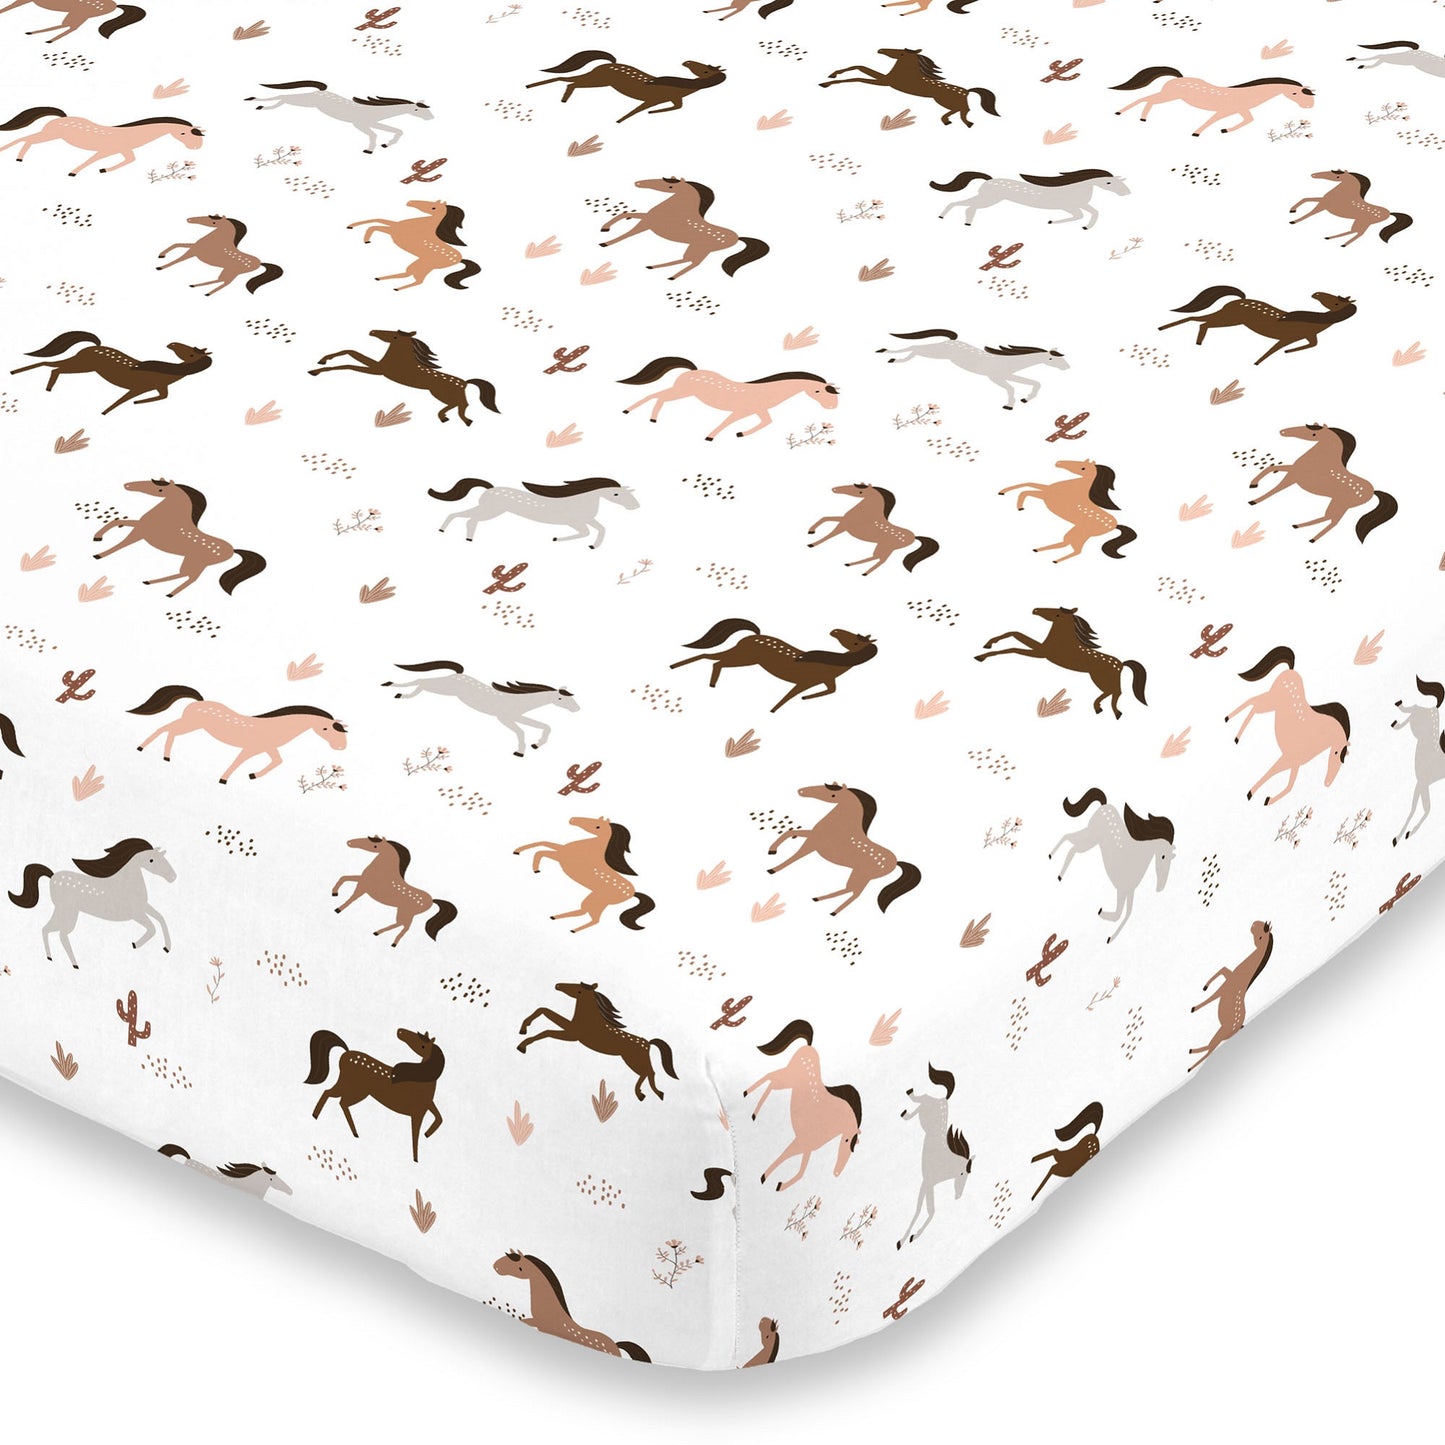 NoJo Desert Sunset Horse Tan, Taupe, Brown and White Super Soft Fitted Mini Crib Sheet